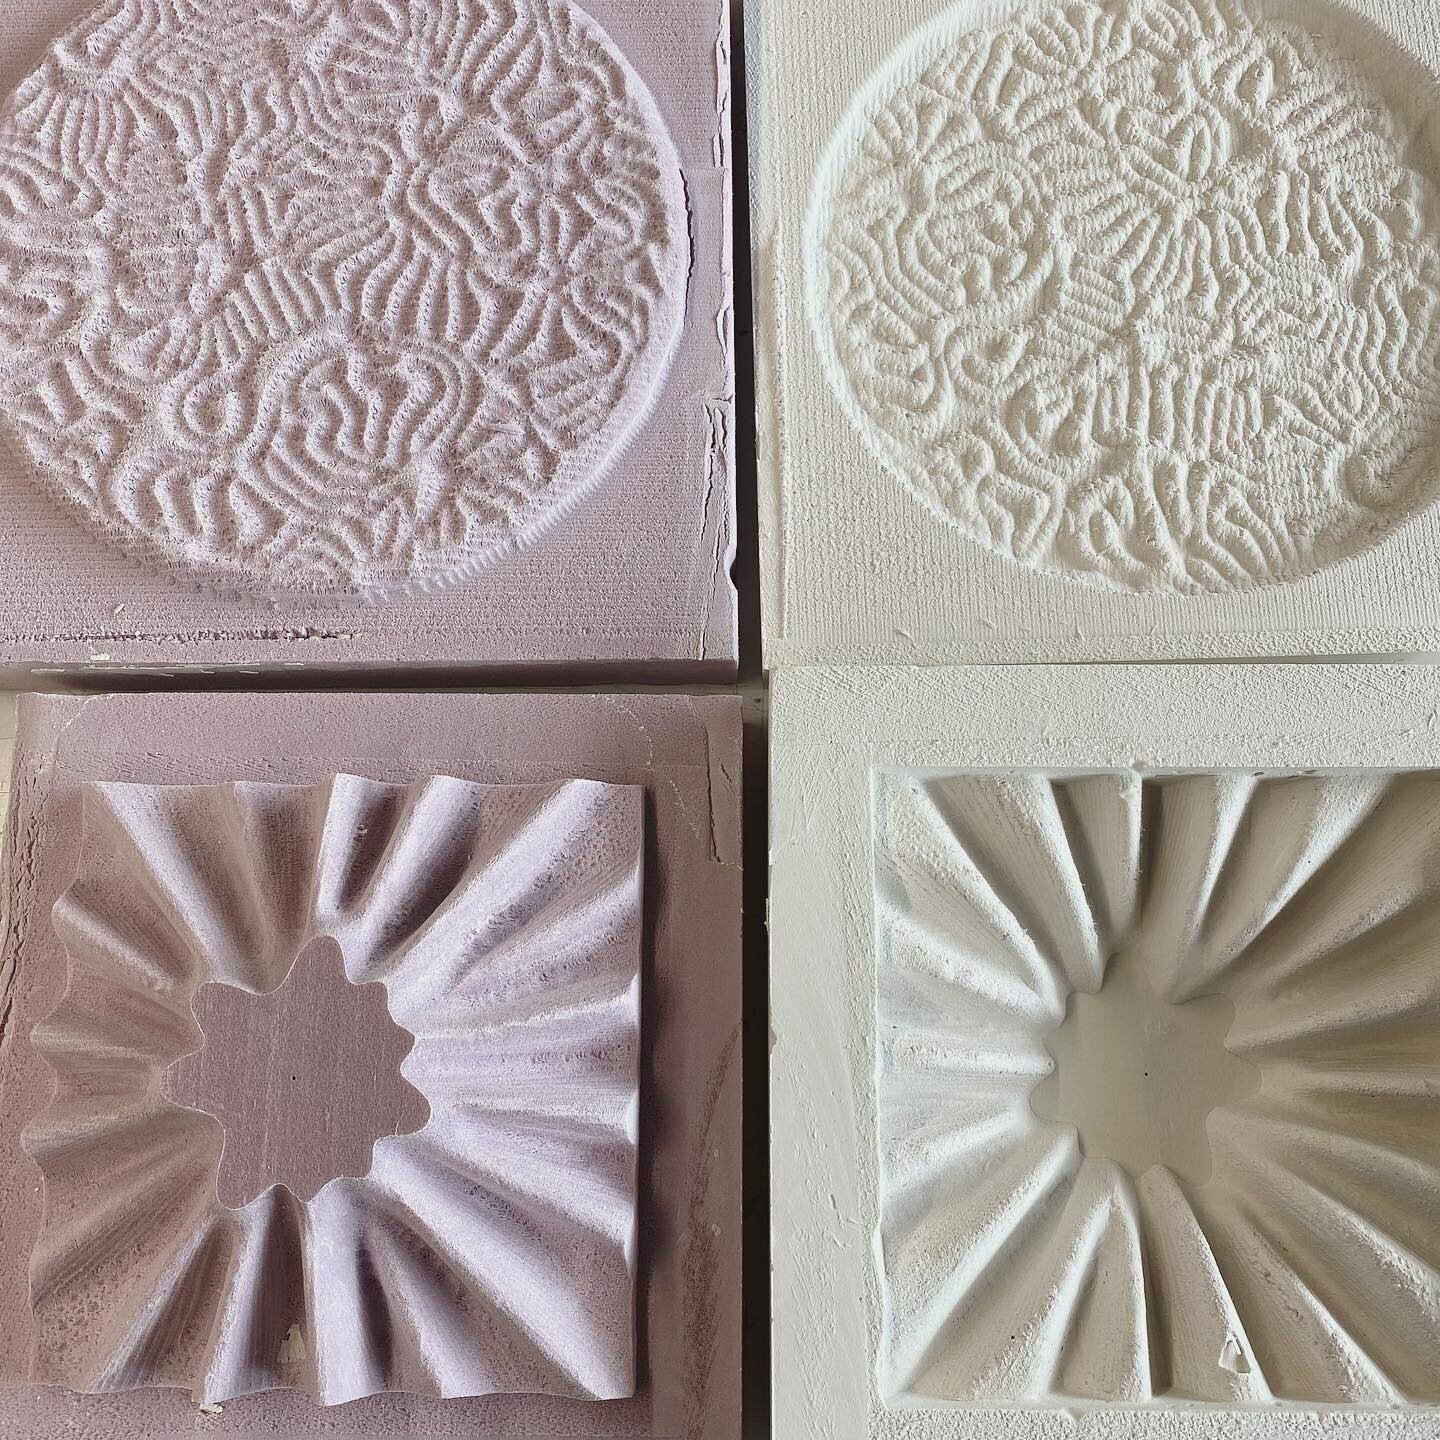 New slump and casting molds for #vesselsandvolumes ! 
-
mold design + CNC by Justin Levelle